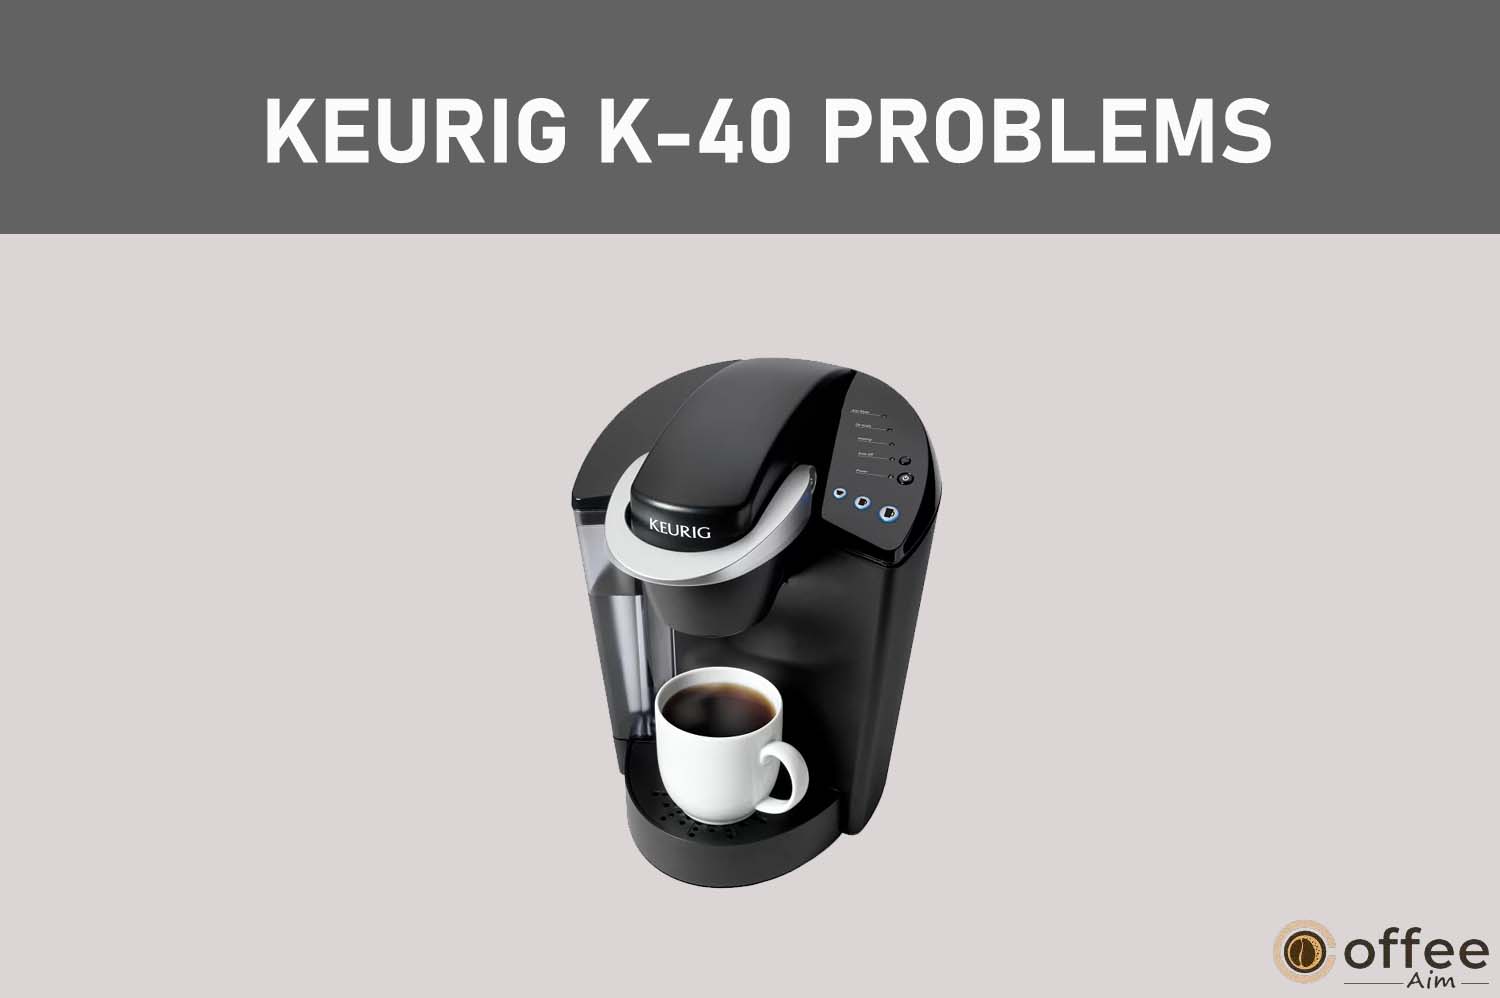 Feature image for the article "Keurig K-40 problems"